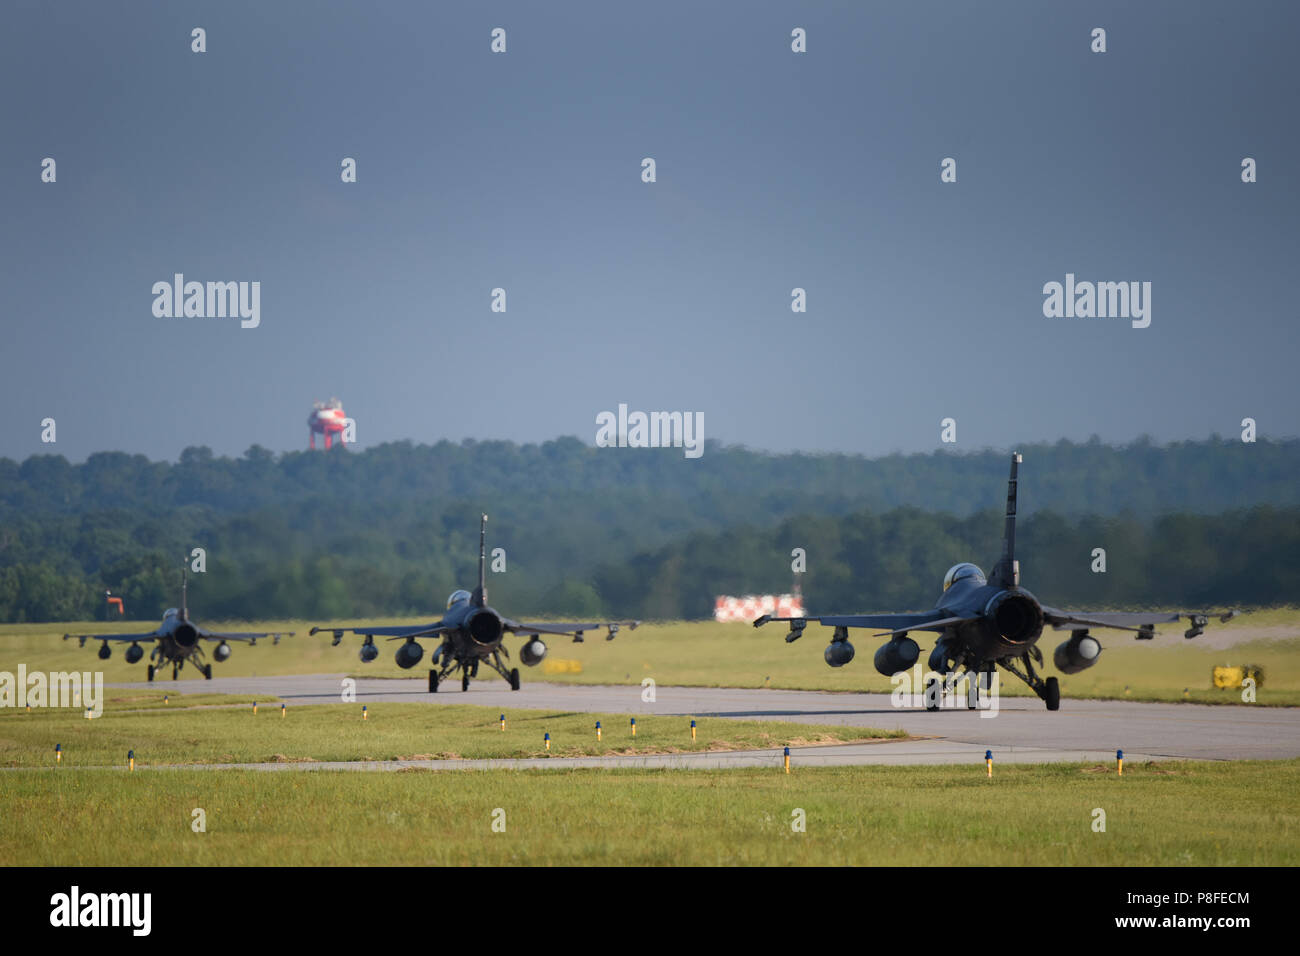 U.S. Air Force aircraft maintenance personnel and fighter pilots from the South Carolina Air National Guard's 169th Fighter Wing at McEntire Joint National Guard Base, South Carolina, perform preflight and launch operations to deploy F-16 Block 52 Fighting Falcon fighter jets for an AEF rotation to Southwest Asia, July 11, 2018. The South Carolina Air National Guard’s 169th Fighter Wing is deploying nearly 300 Airmen and approximately a dozen F-16 Block 52 Fighting Falcon fighter jets to the 407th Air Expeditionary Group in Southwest Asia in support of an Air Expeditionary Force rotation. (U.S Stock Photo